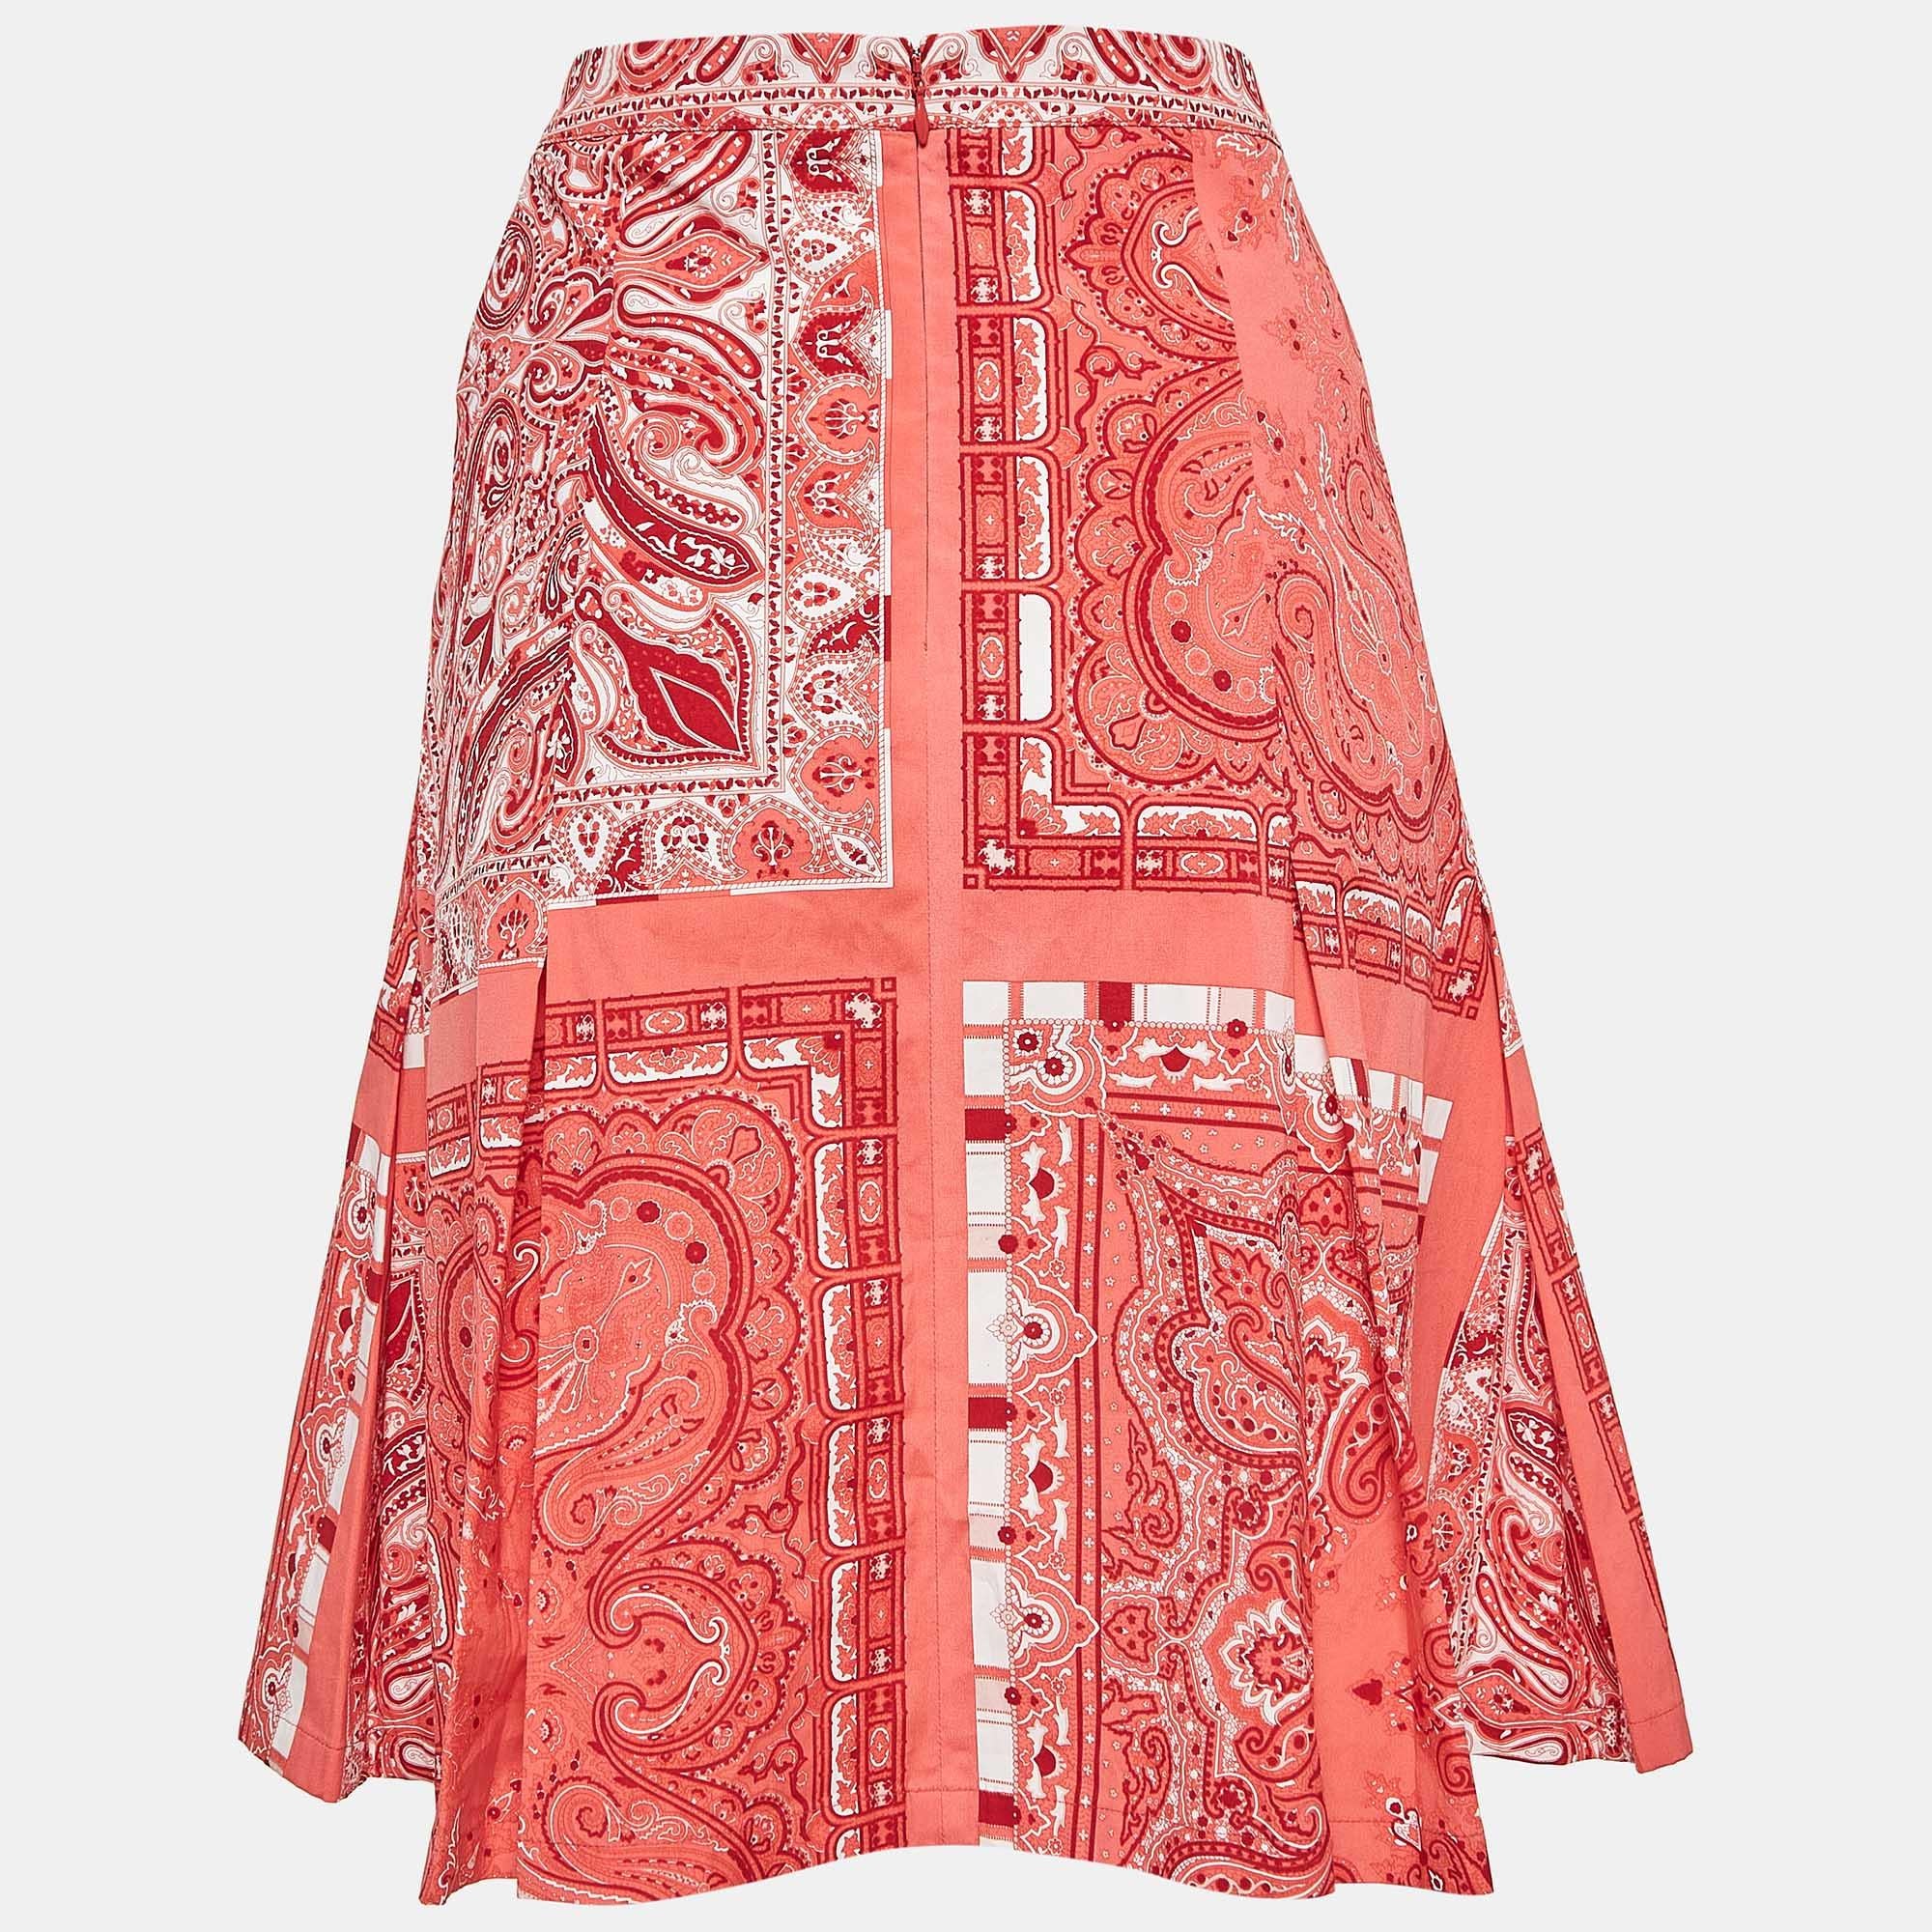 Experience the charm of designer clothing with this gorgeous skirt. Made from quality fabrics, the skirt has a simple allure and a great fit. Pair it up with a tailored blouse or a simple top and high heels.

Includes: Brand Tag